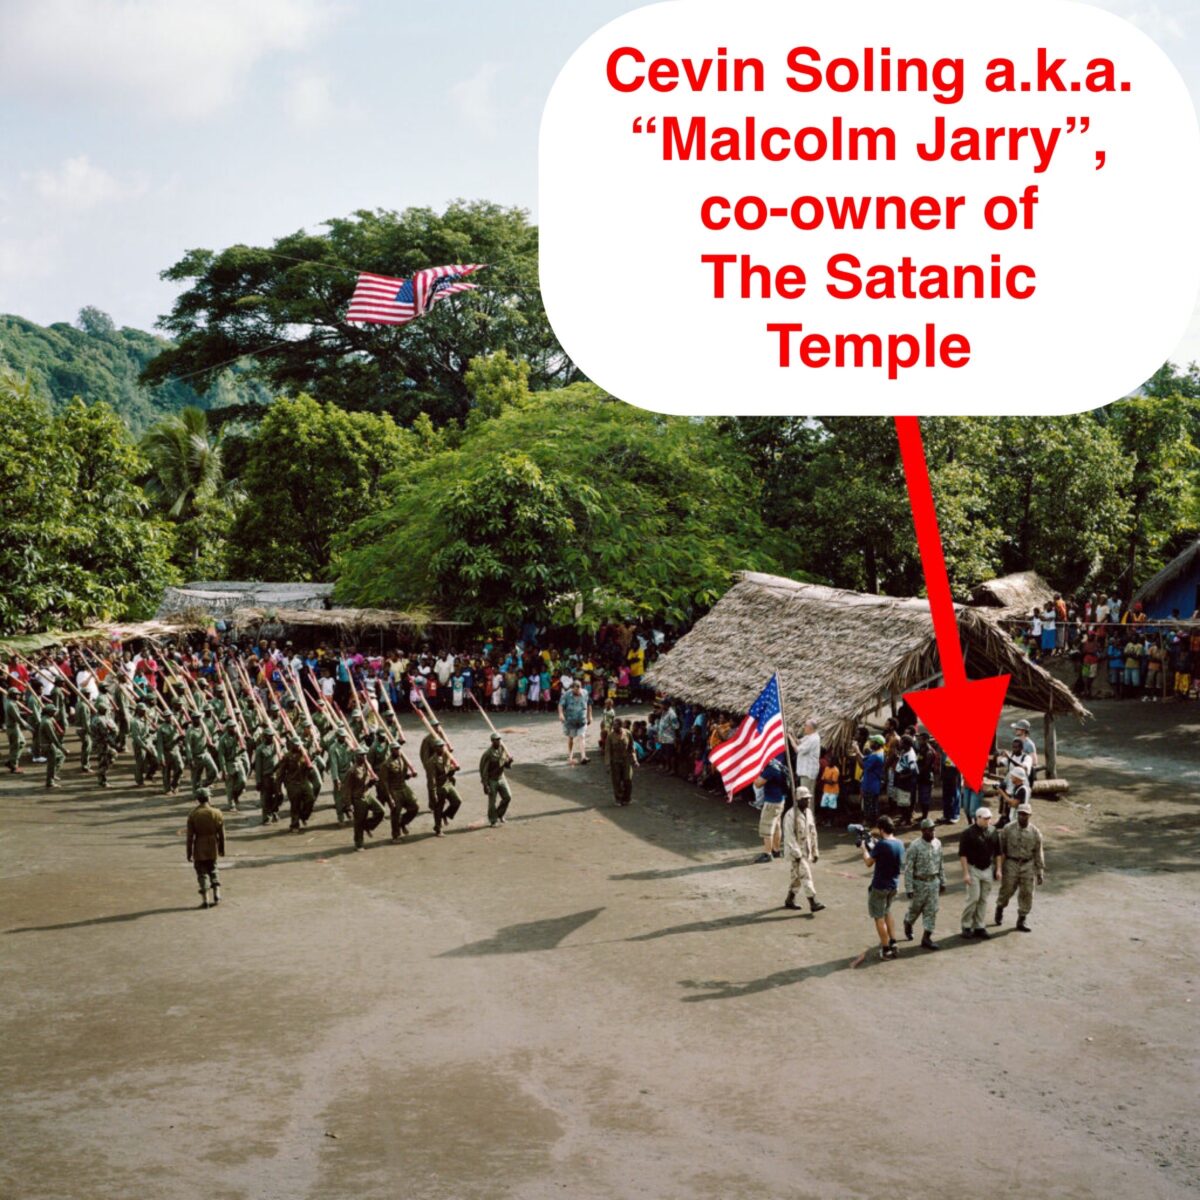 Arrow pointing at white man in khaki pant and a baseball cap, text says "Cevin Soling aka 'Malcolm Jarry', co-owner of The Satanic Temple." Soling is flanked by two Ni-Vanuatu men in mlitary fatigues, with another man carrying a USA flag a few steps behind him. Another six paces behind that man is a contingent of NI-Vanuatu men marching in fatigues with wooden muskets. From a hut and at the edge of a clearing, more people look on.